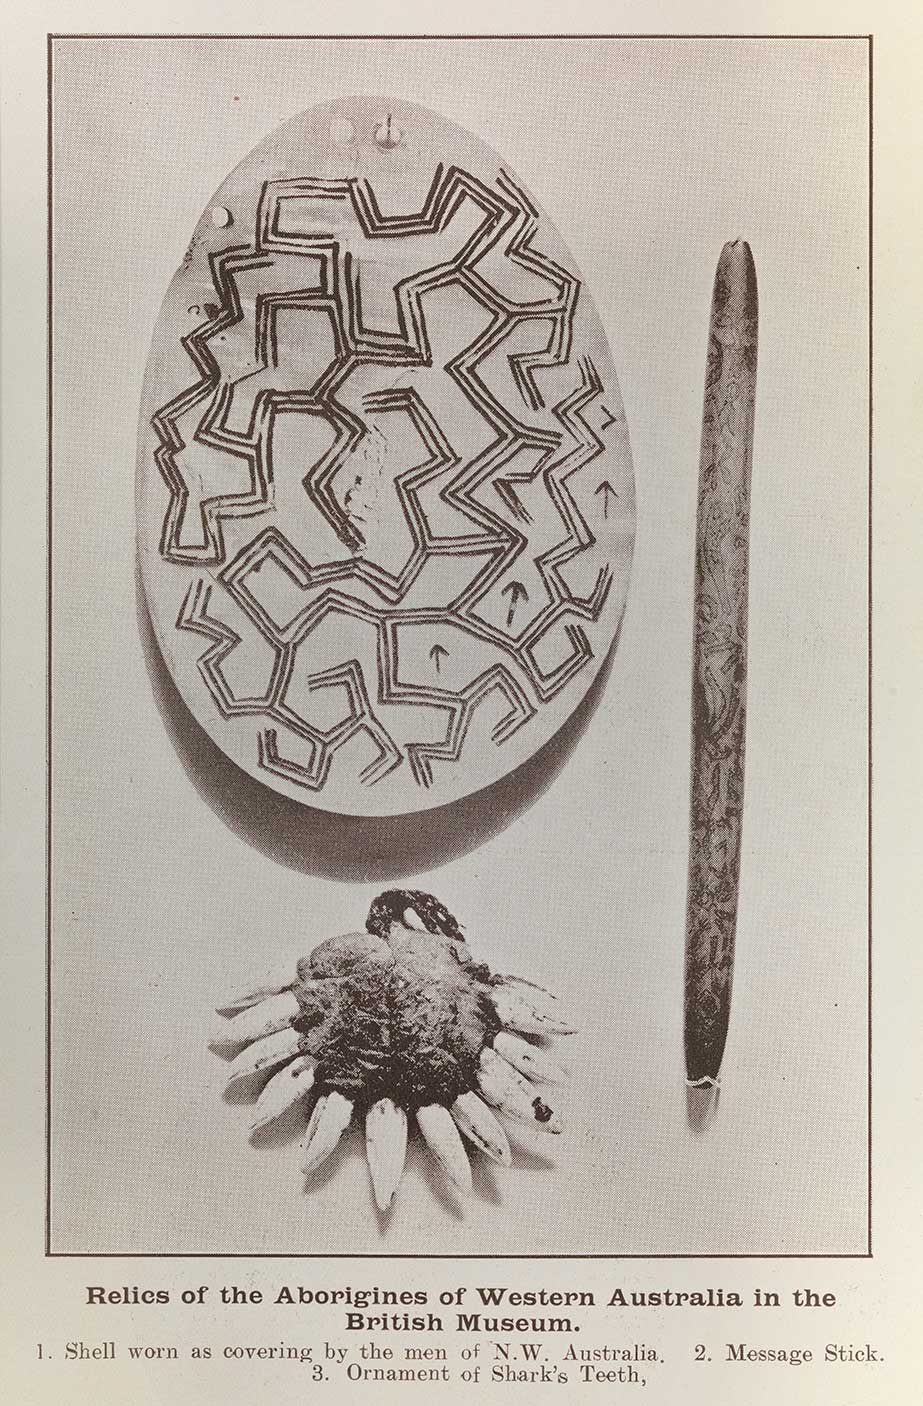 Decorated pearl shell, message stick and ornament made from shark teeth held at the British Museum in 1907